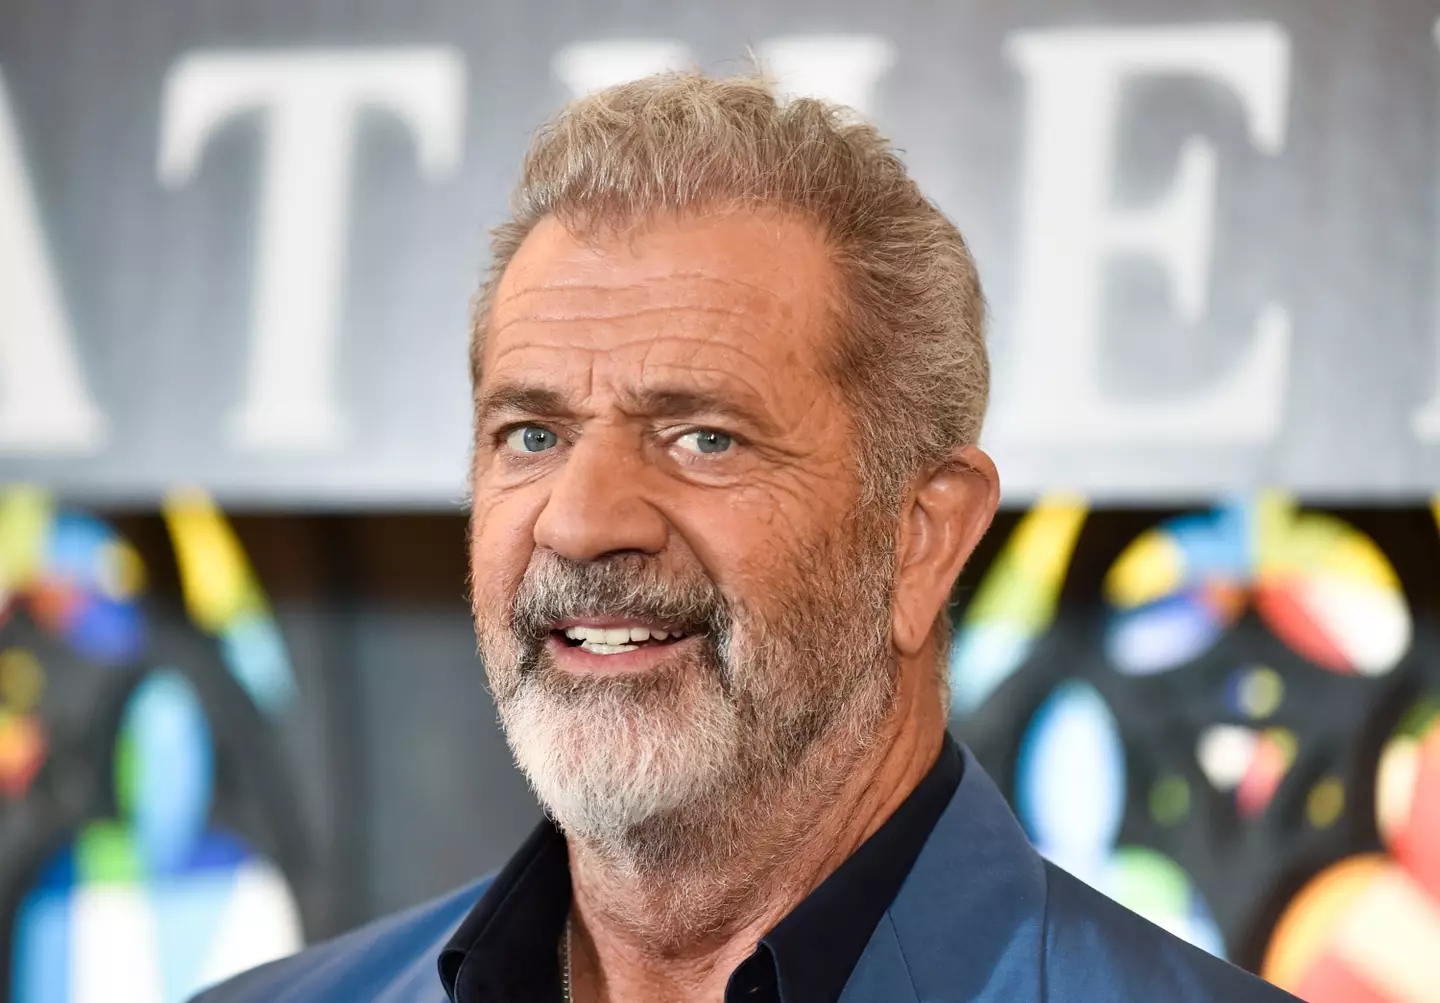 Mel Gibson directed the 2004 movie. (Rodin Eckenroth/WireImage)